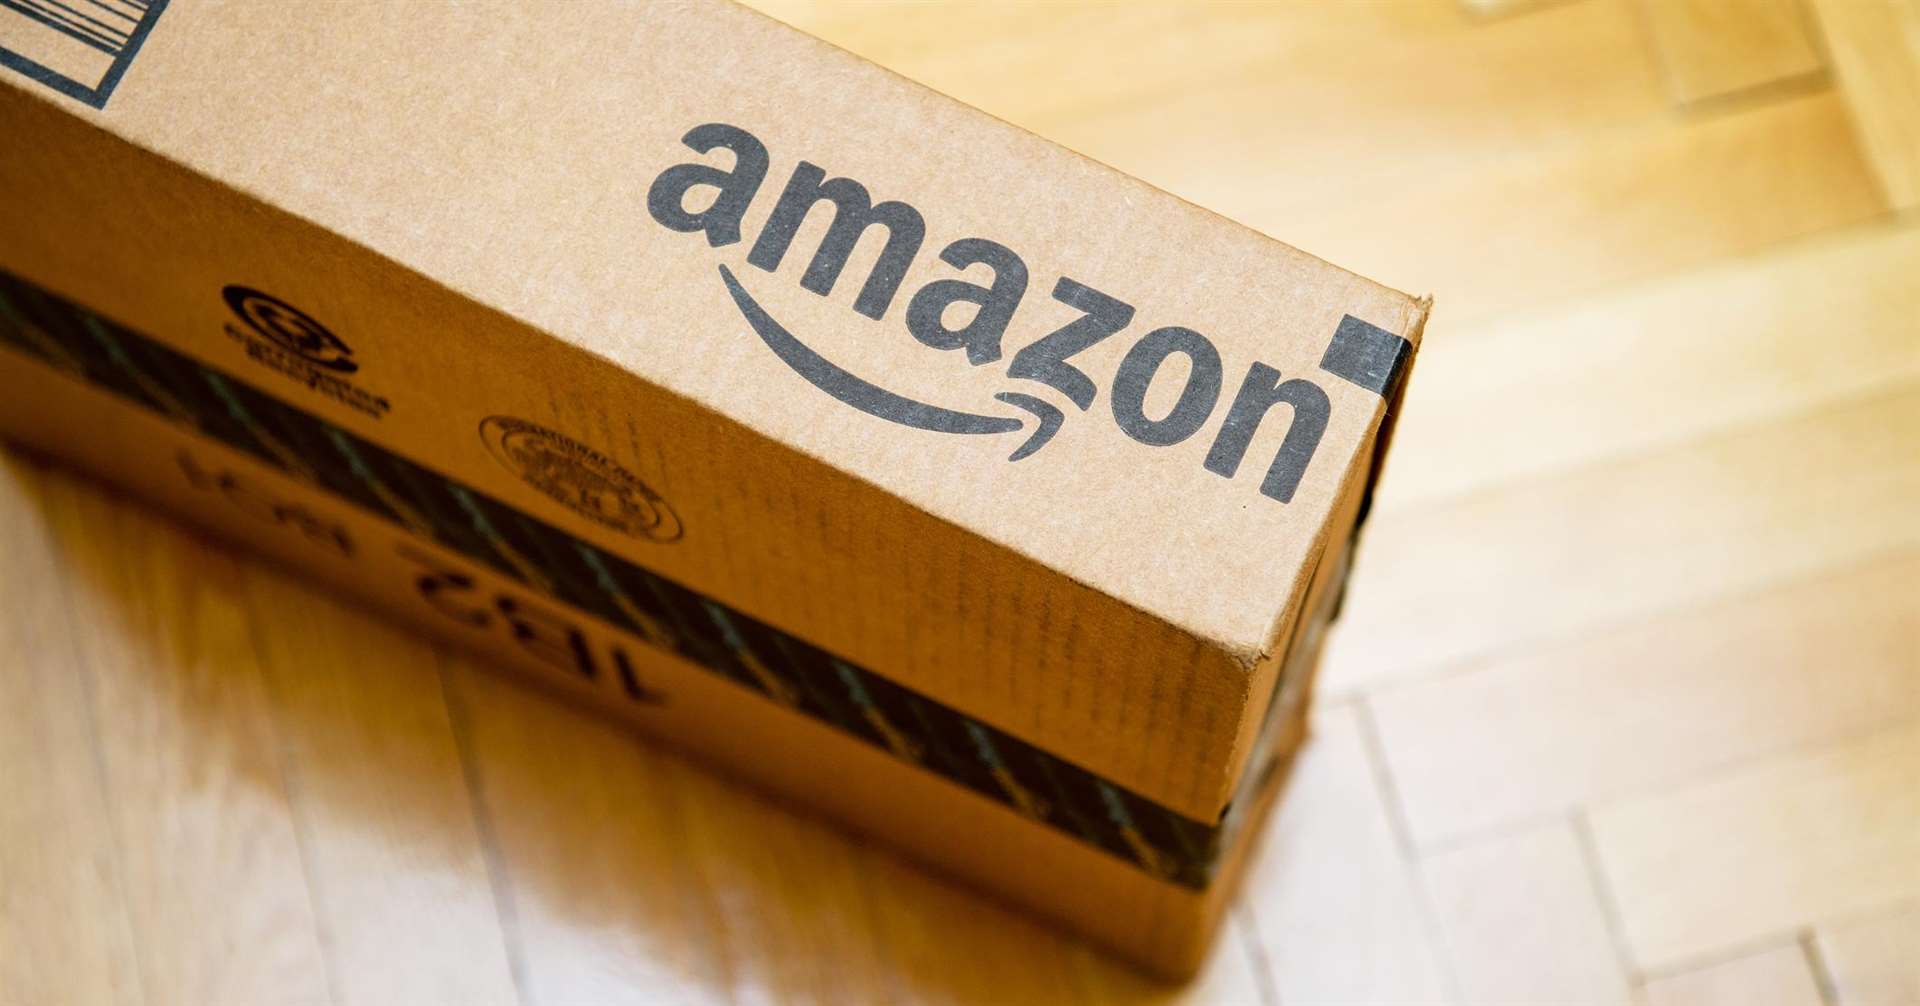 Amazon recently hosted its biggest ever August bank holiday sale